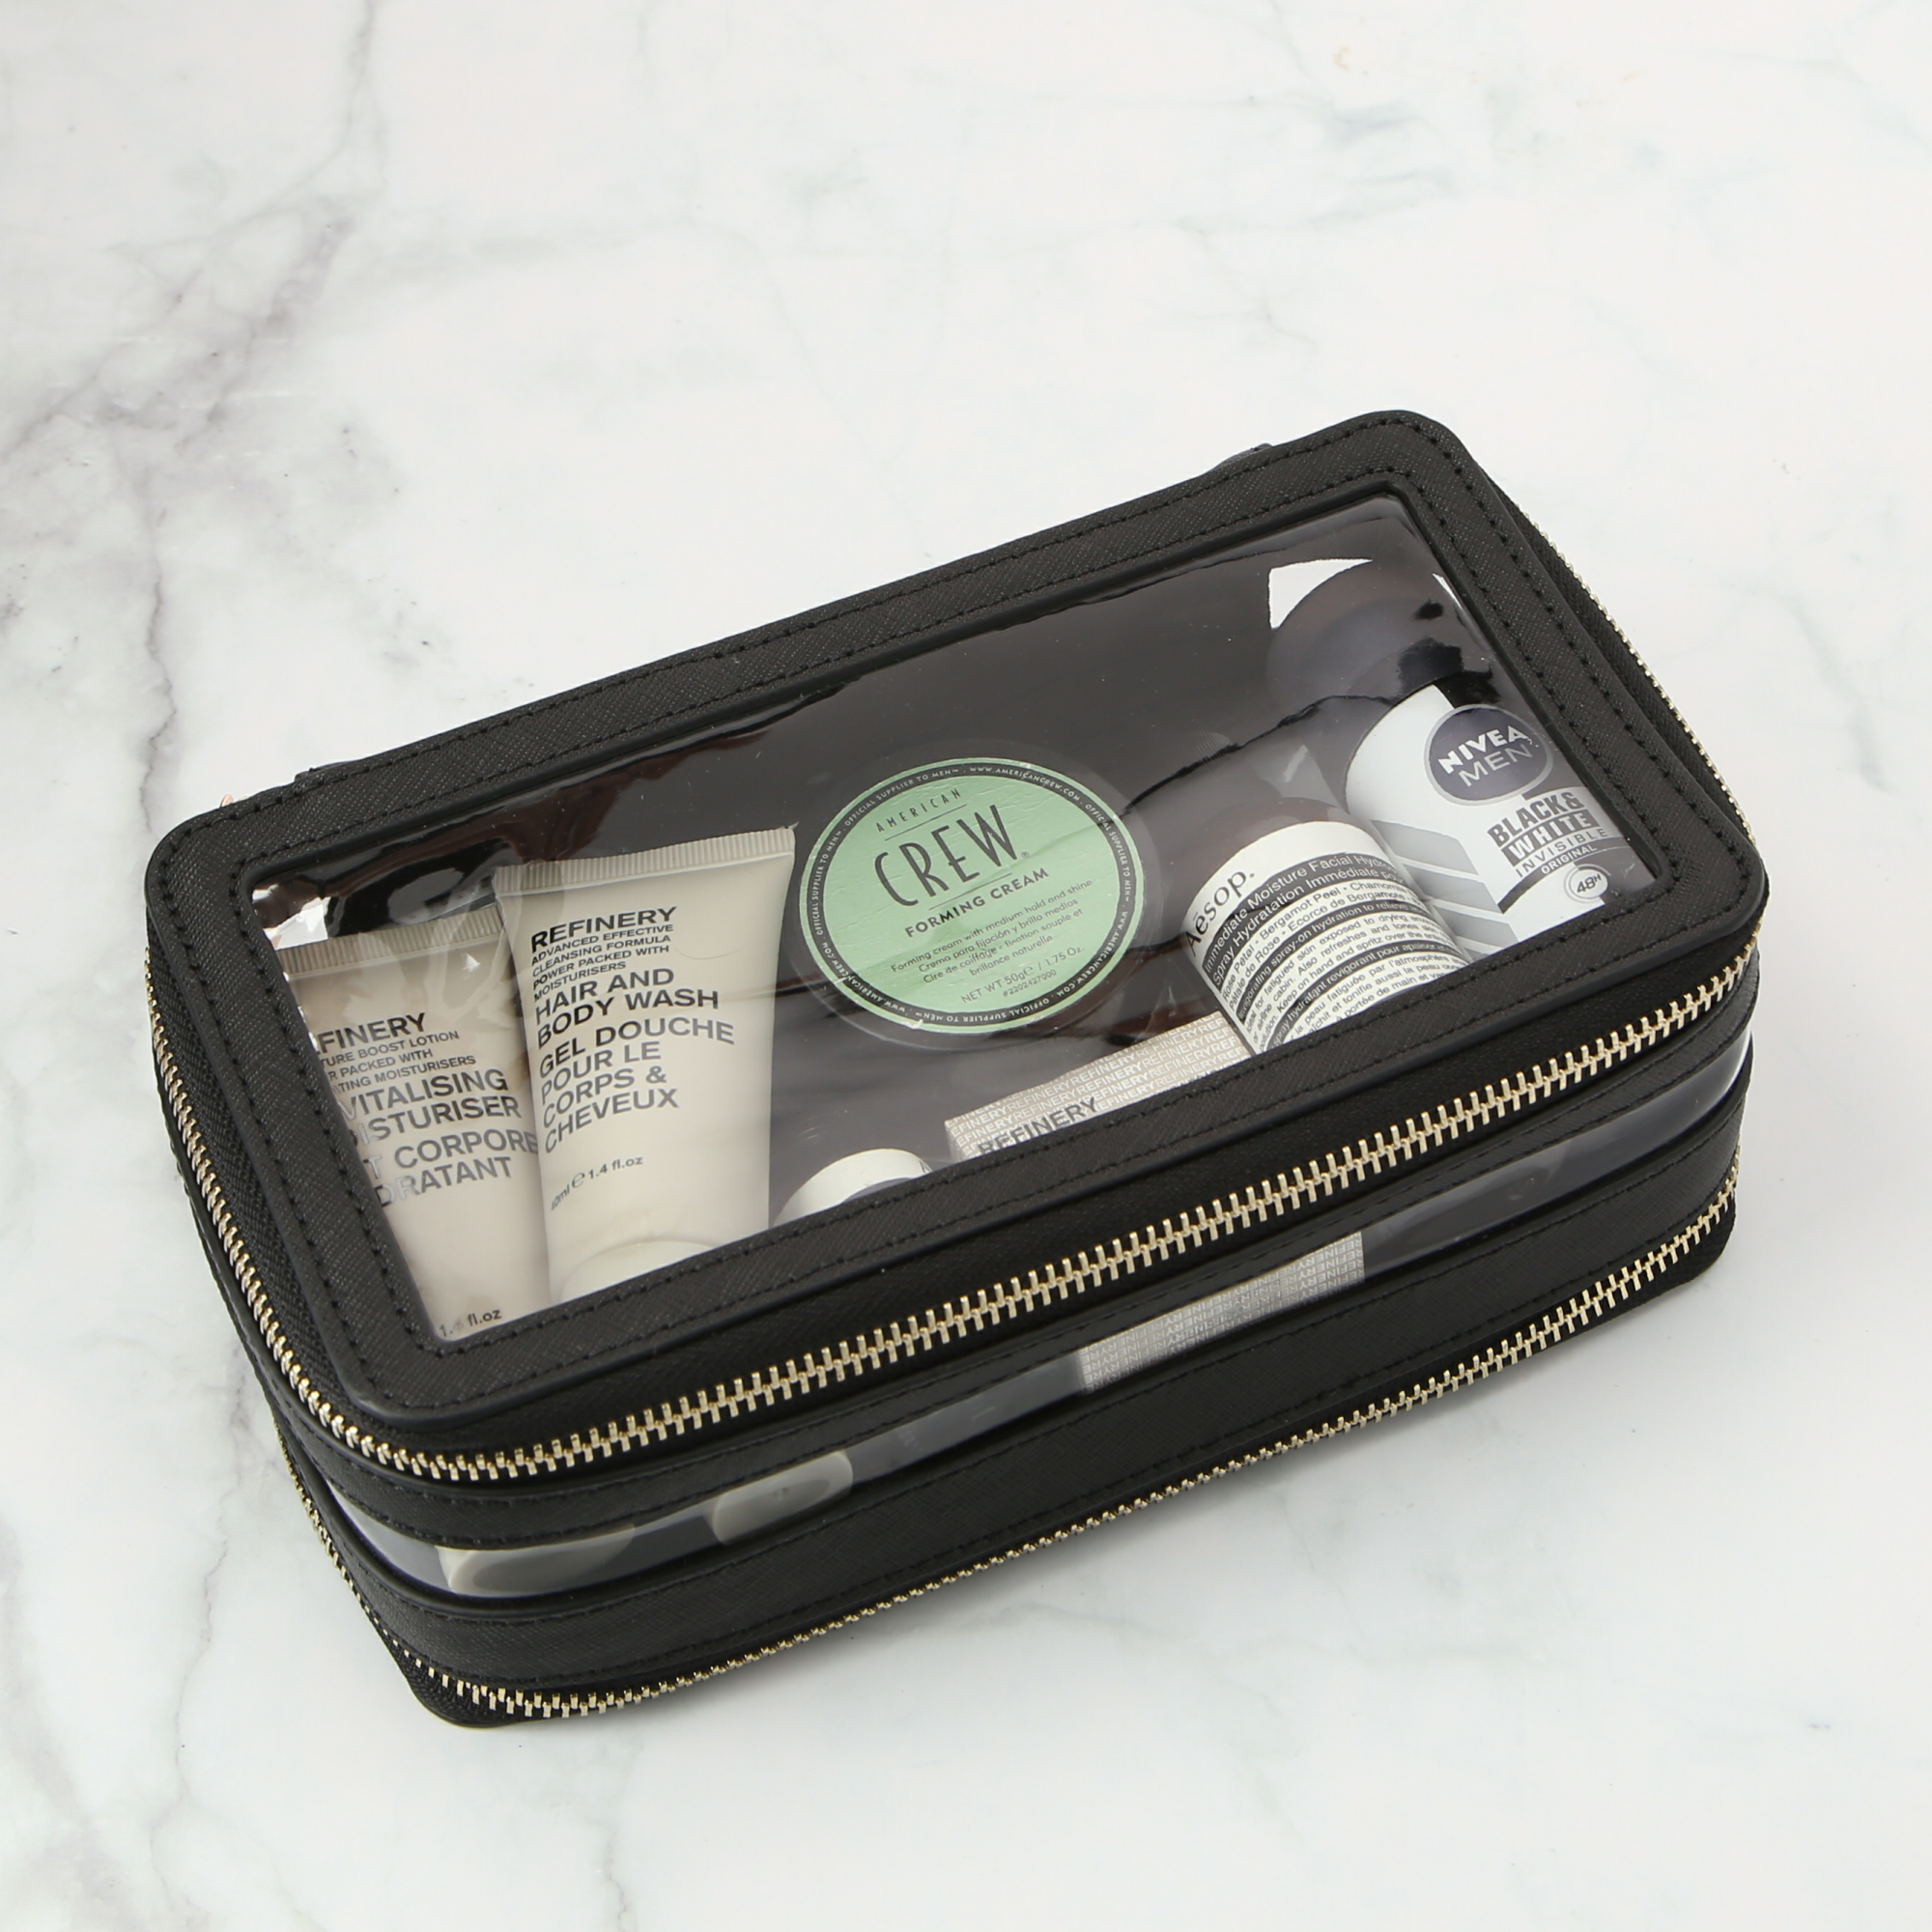 Global Commuter Black 2 compartment Toiletry Case 2 credit Ana Carapina Global Commuter